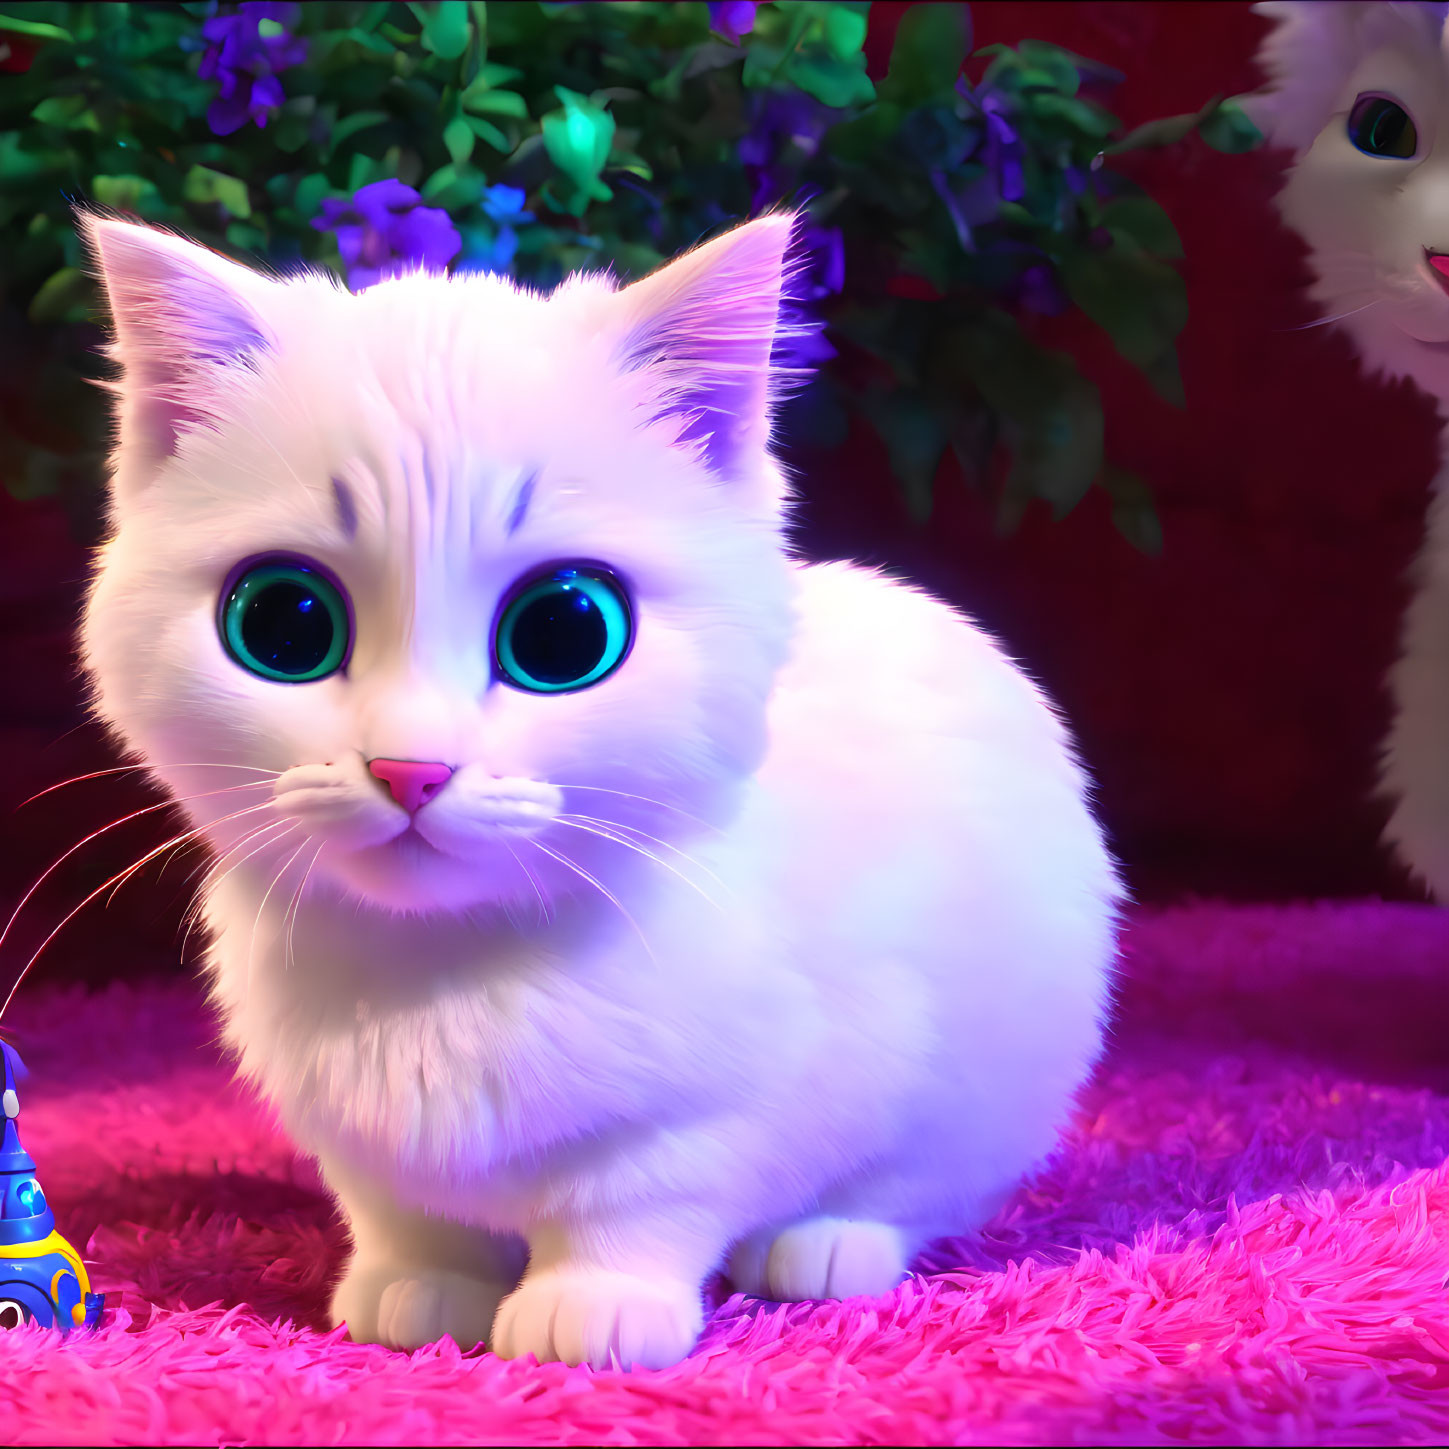 Animated kitten with large blue eyes on pink fluffy surface with vibrant lighting